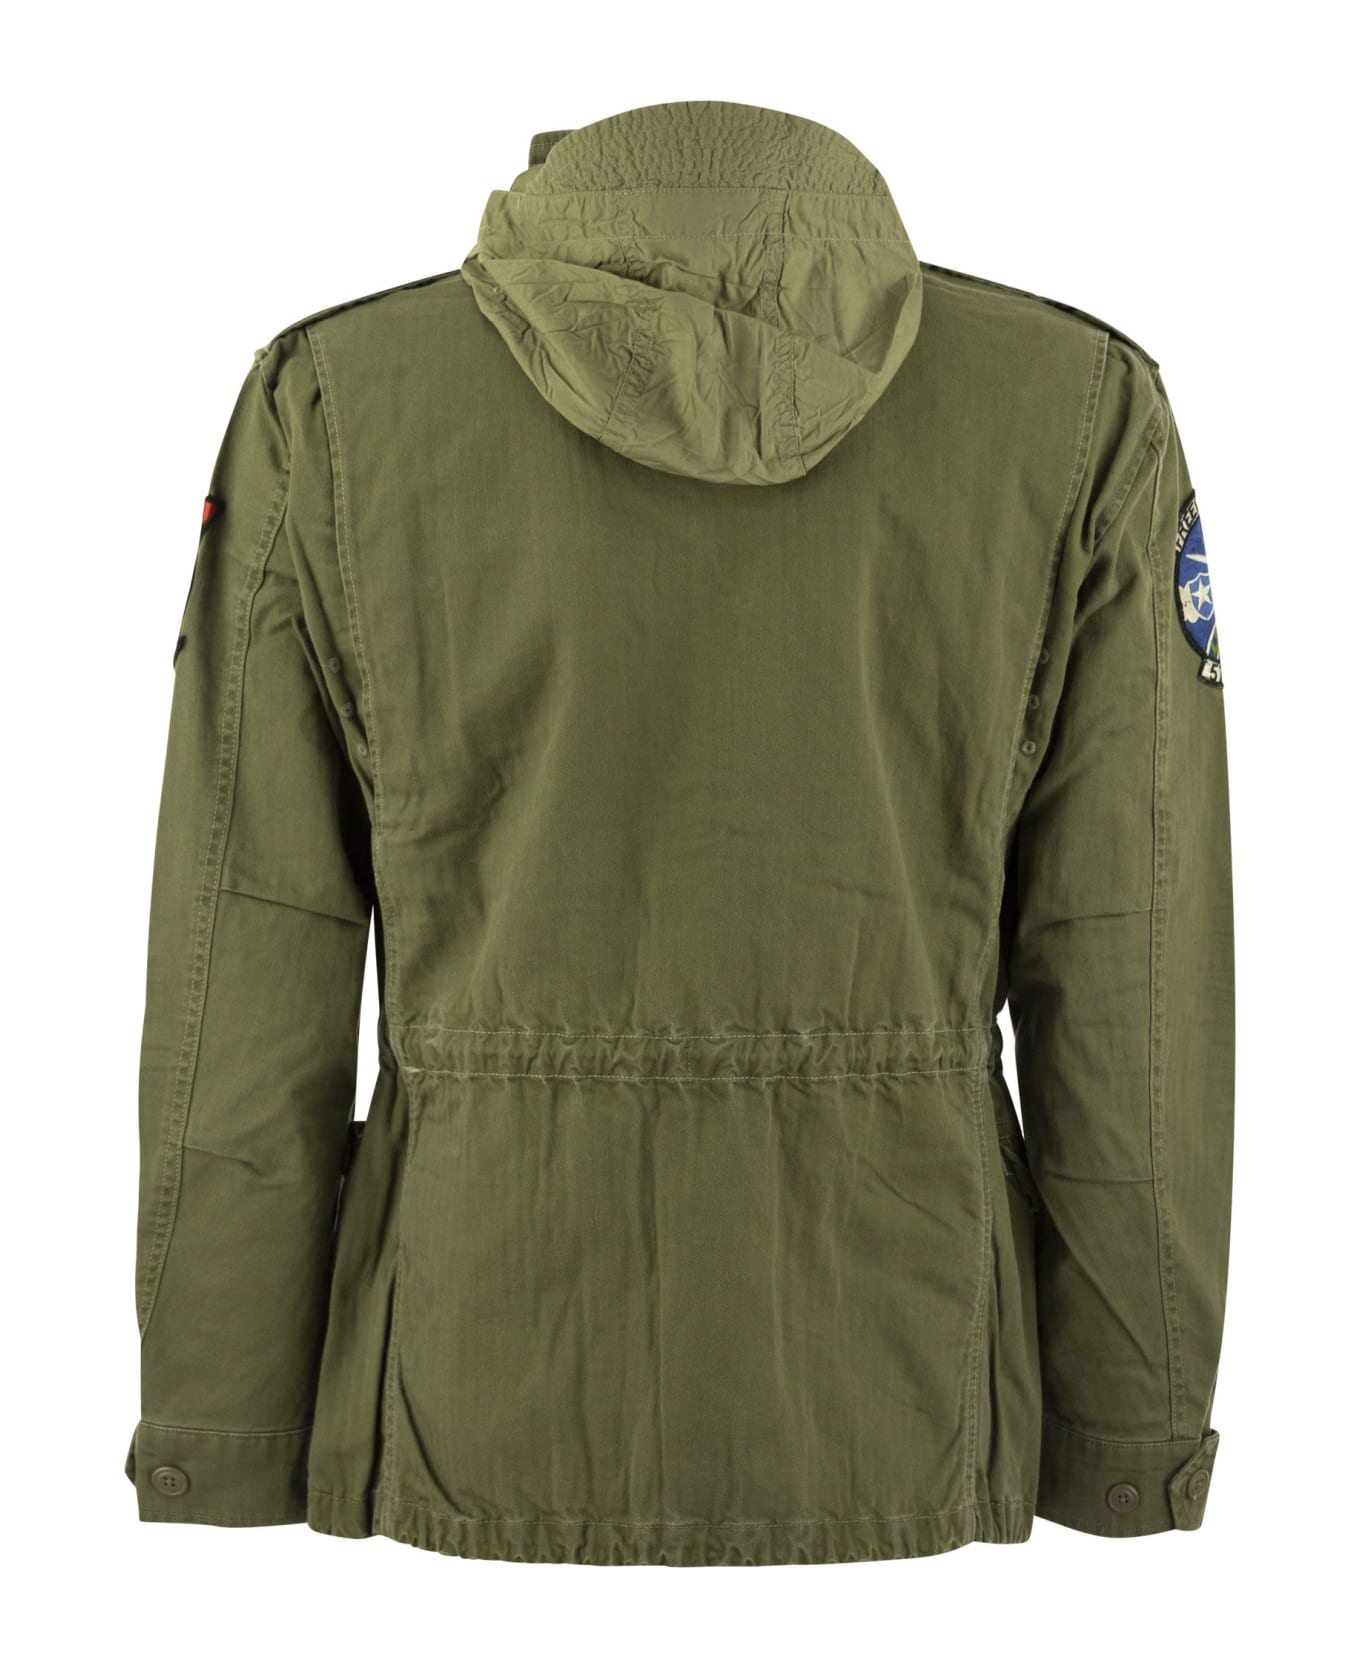 Polo Ralph Lauren Iconic Military Jacket With Patch - Military Green